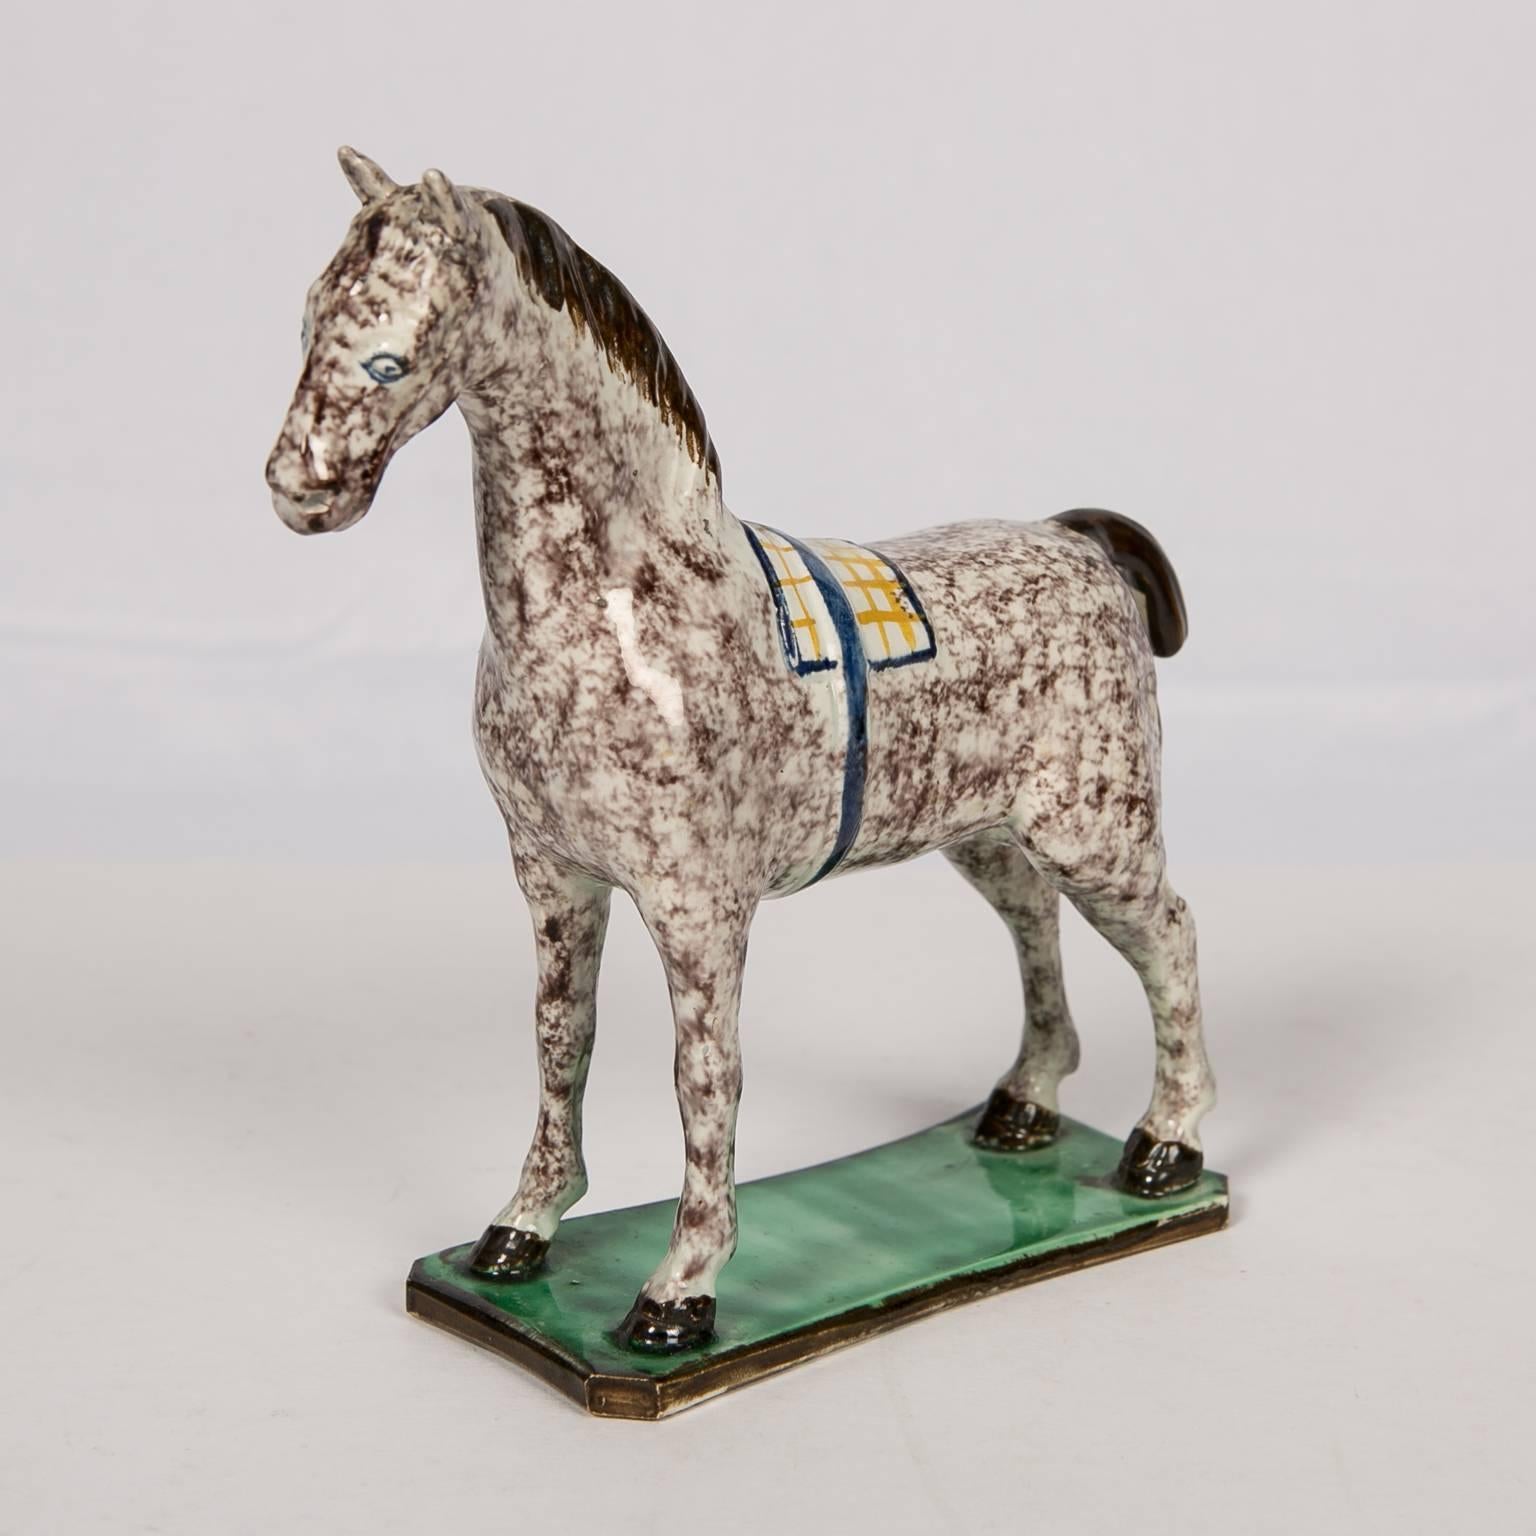 A naive figure of a pearlware horse standing on an oblong grassy green base. The figure is well modeled and simply decorated with a sponged decoration replicating the coat of a dappled gray. The artist painted a saddle blanket of white and yellow